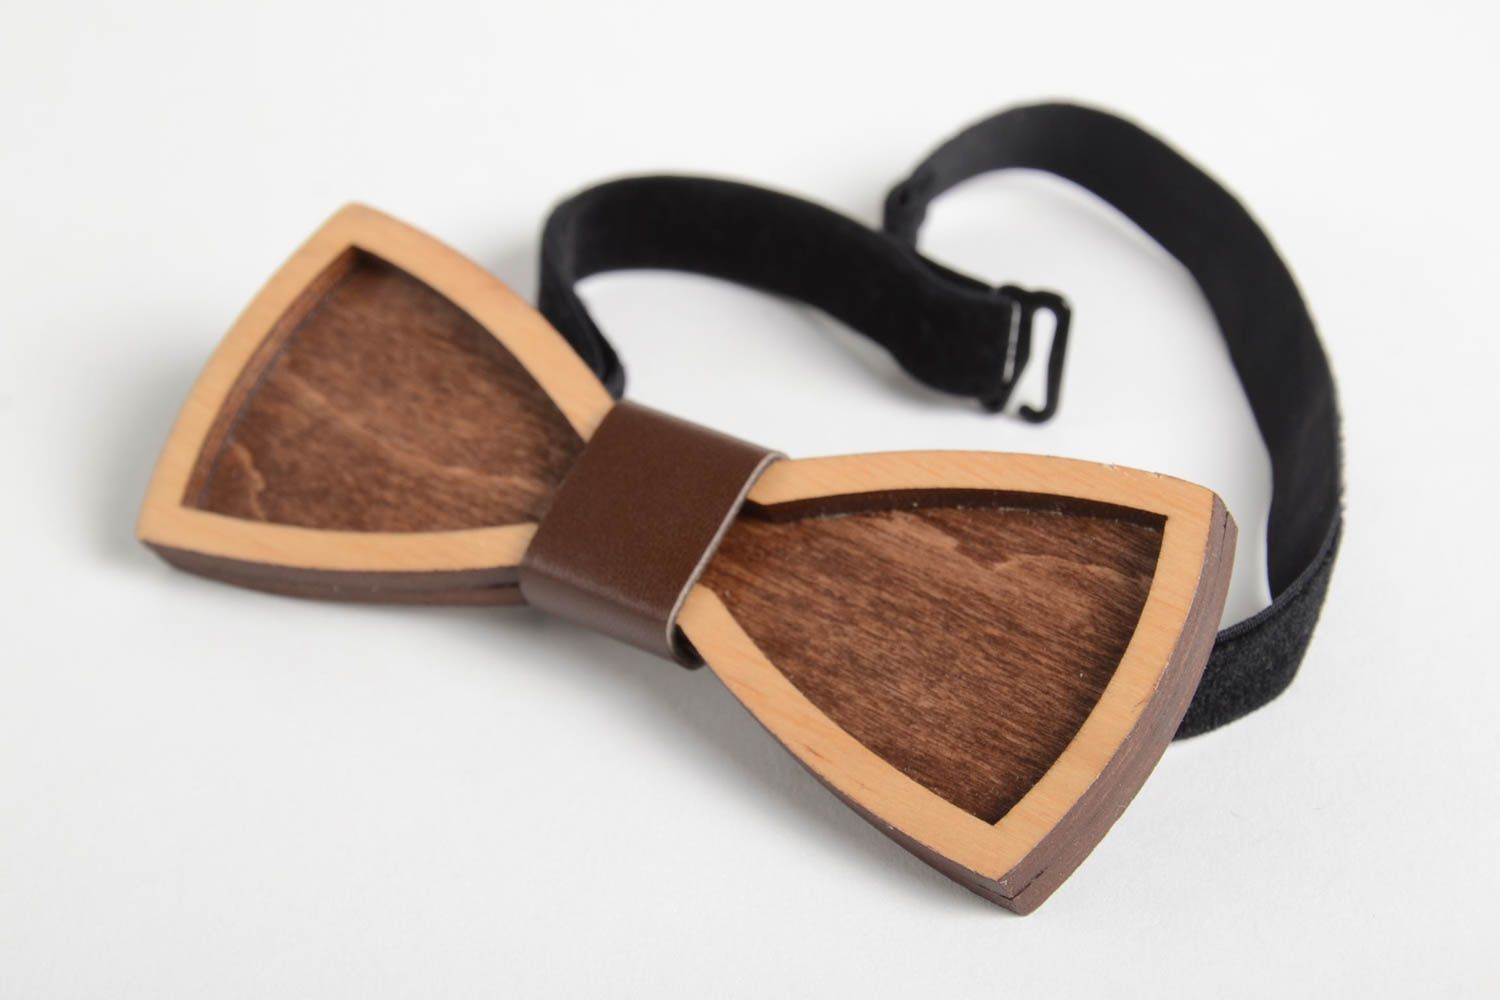 Homemade jewelry wooden bow tie designer accessories fashionable tie cool gifts photo 5